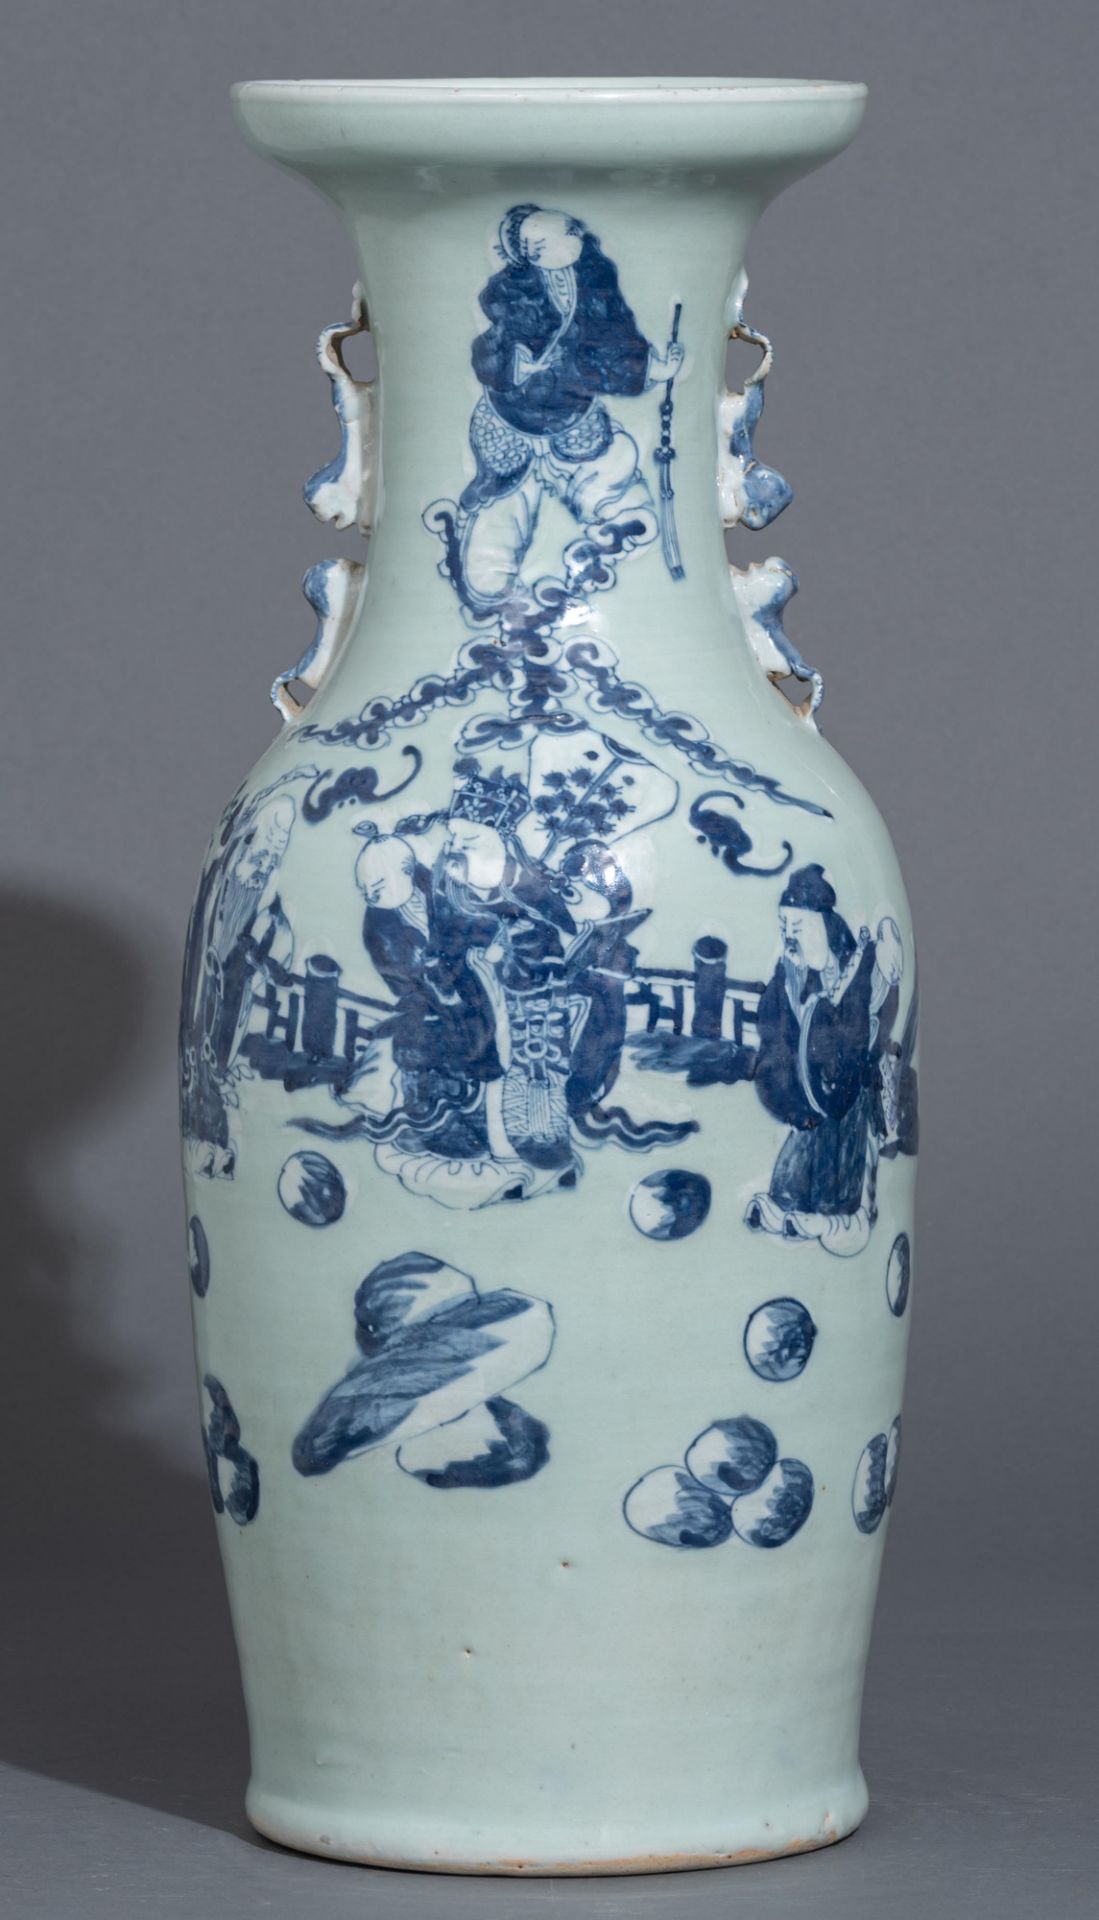 A Chinese blue and white on a celadon ground vase, 19thC, H 58,5 cm - Image 2 of 6